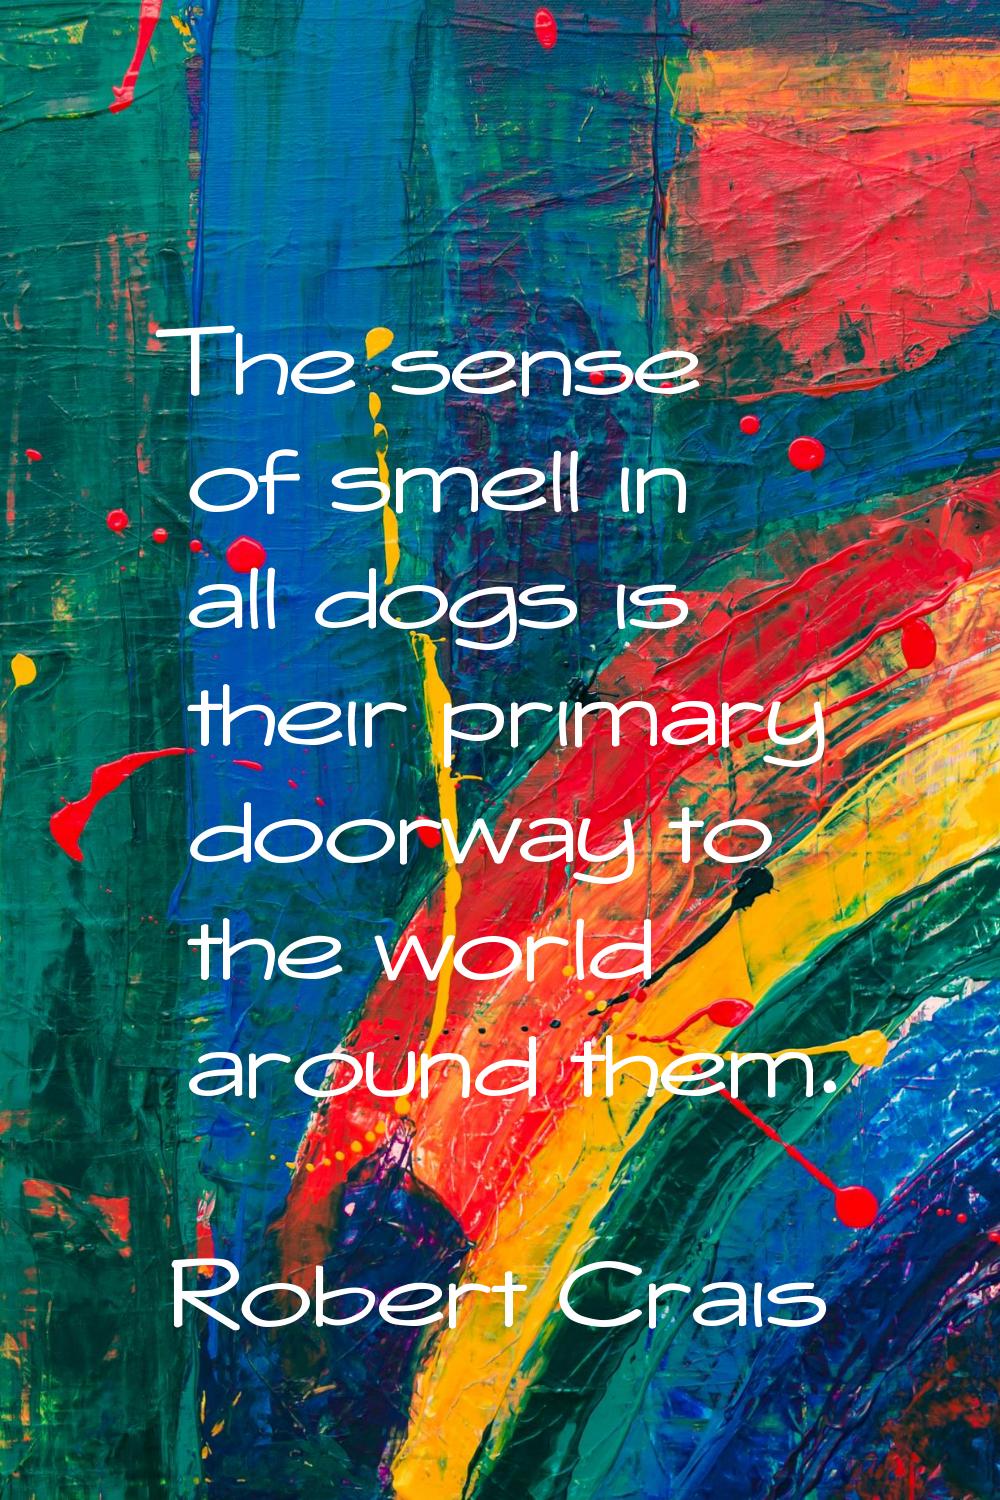 The sense of smell in all dogs is their primary doorway to the world around them.